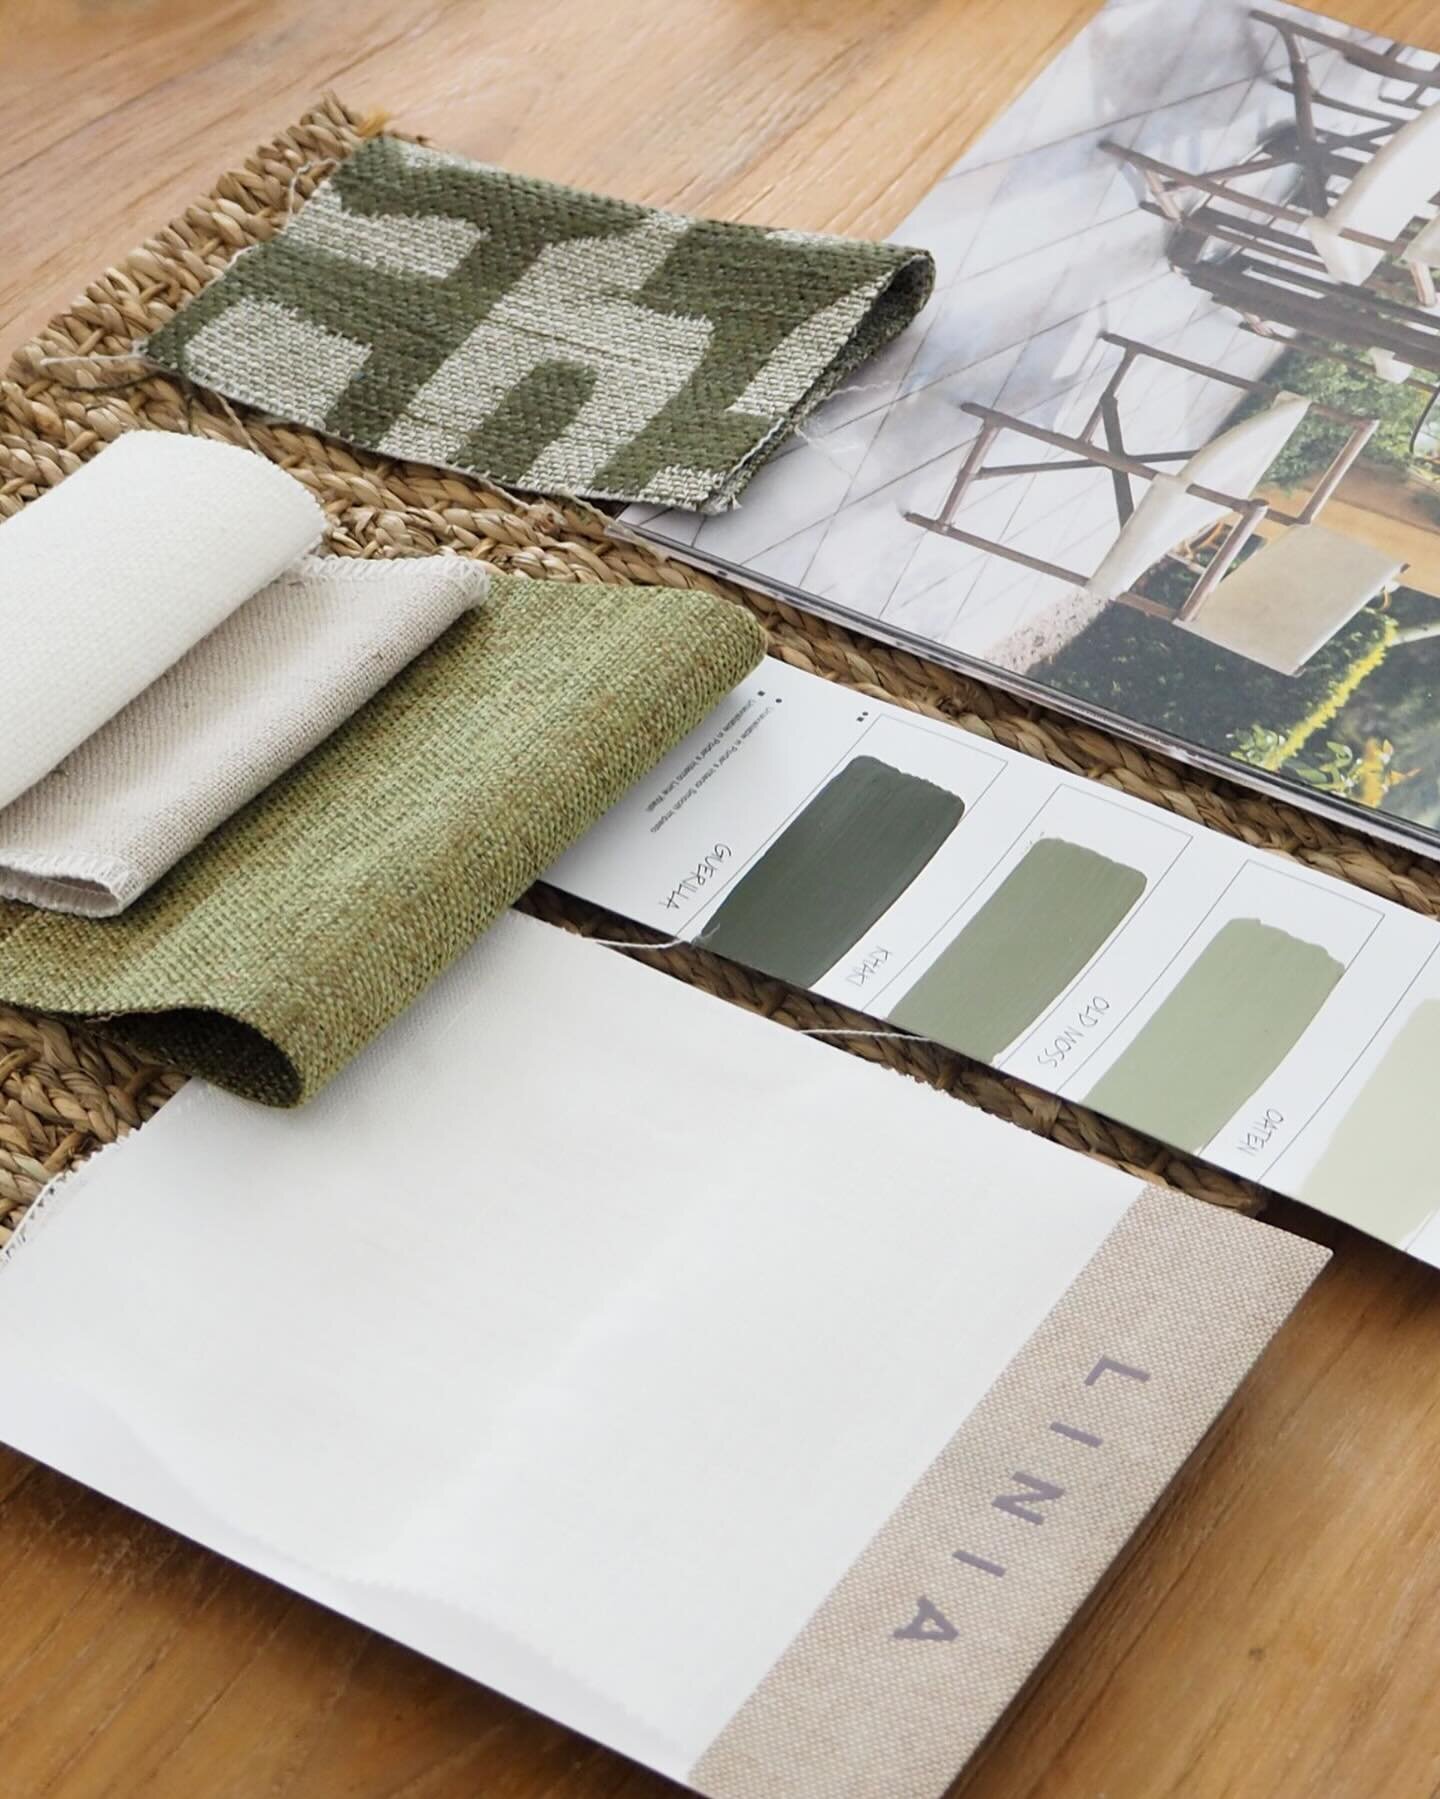 Creating sample boards for client presentations - this scheme is focusing on an earthy + tonal colour palette, using natural materials we are linking our interior to our outside environment. 

🦓 Do you have an upcoming project? We&rsquo;d love to he